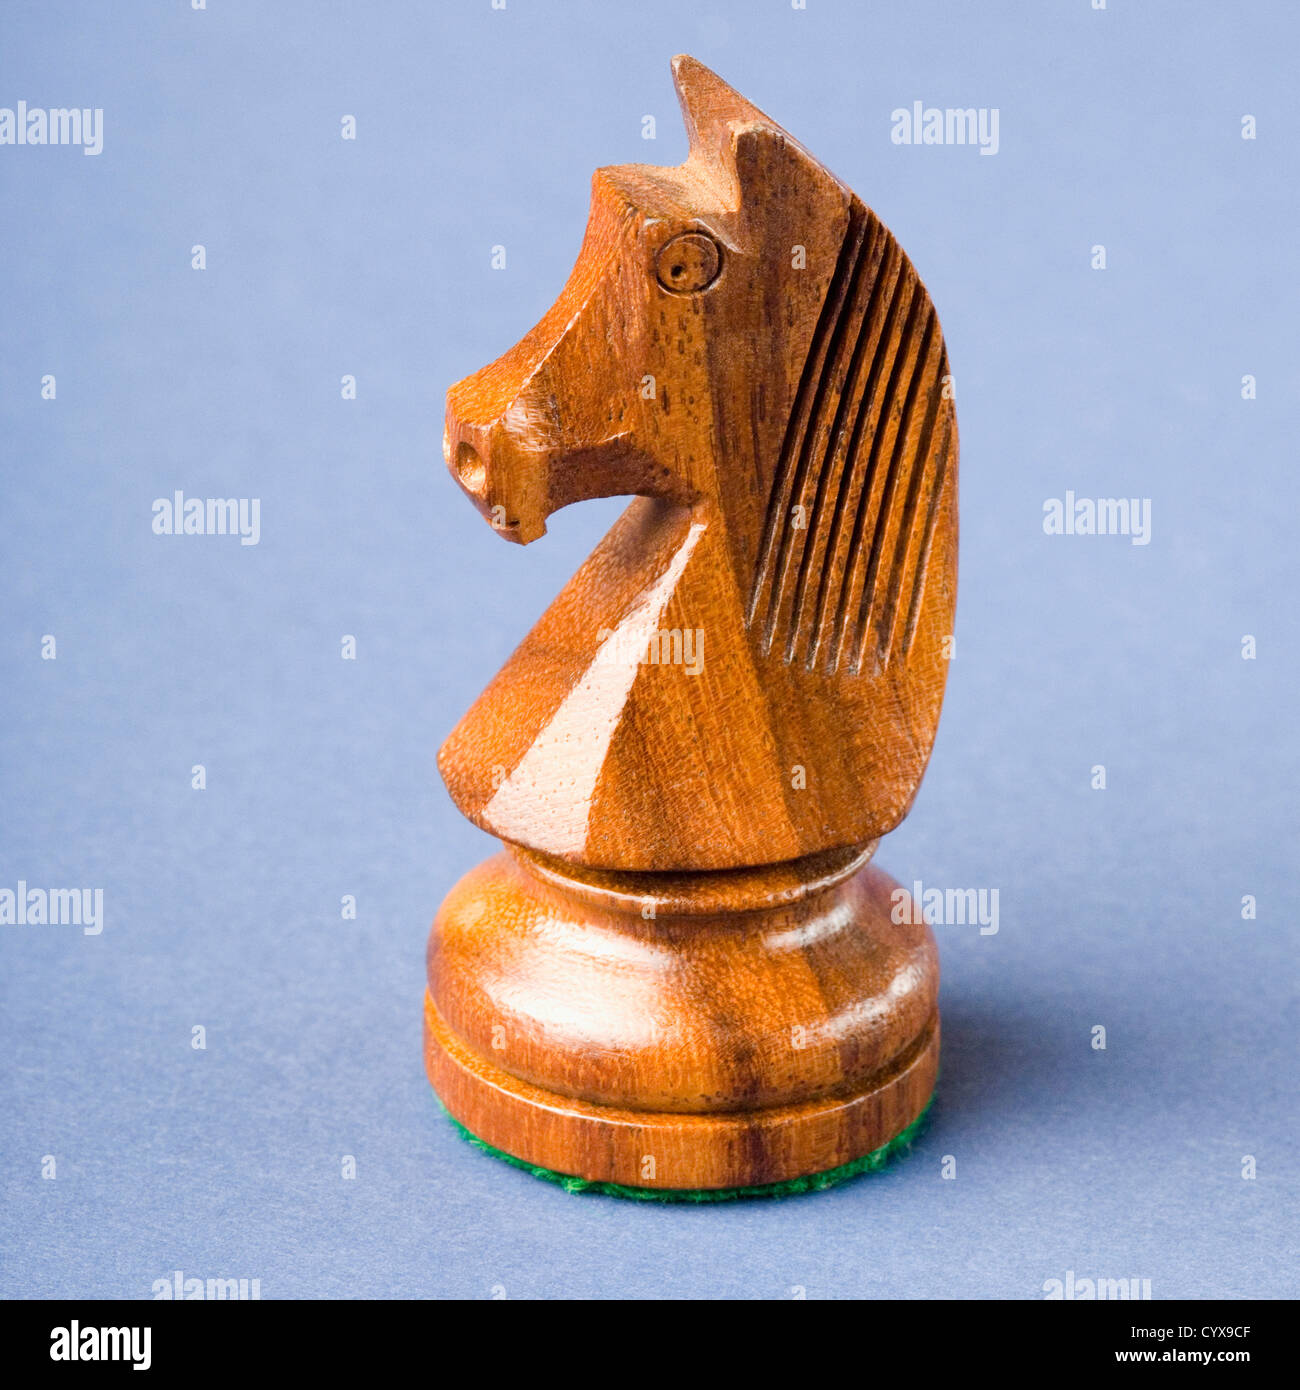 Close-up of a knight chess piece Banque D'Images